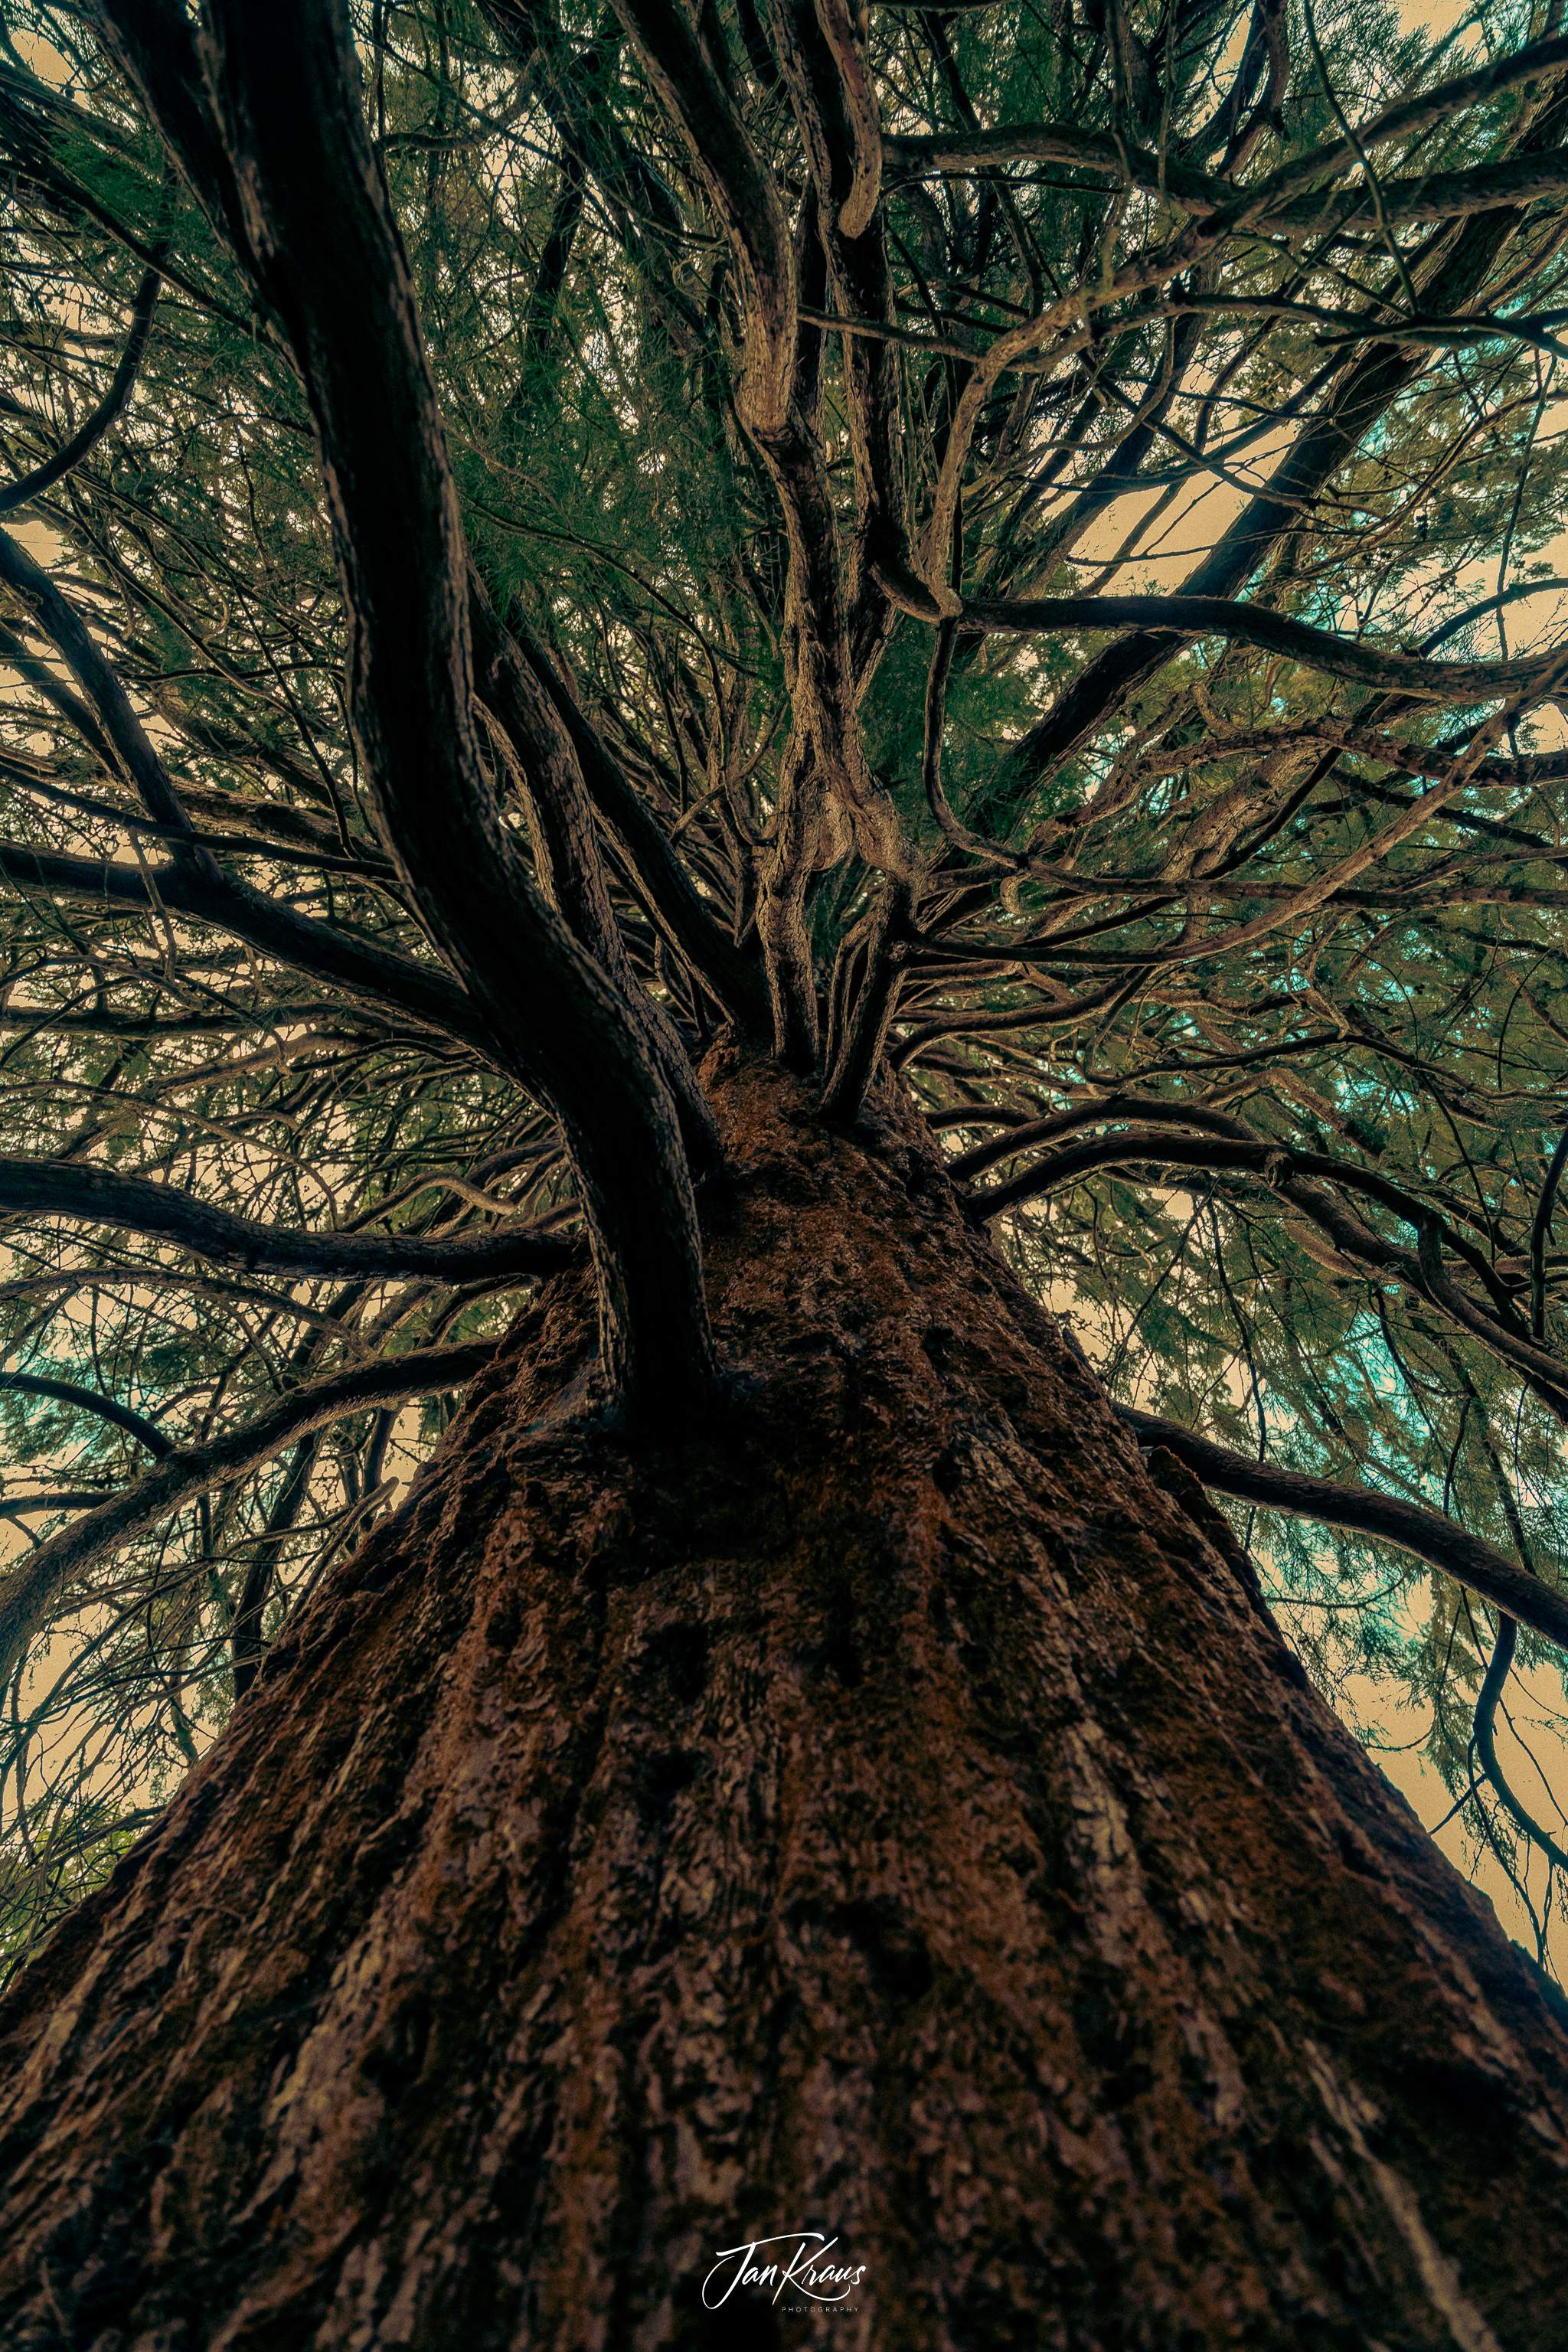 Close-up view of a giant Redwood tree at Wakehurst Place, Sussex, England, UK